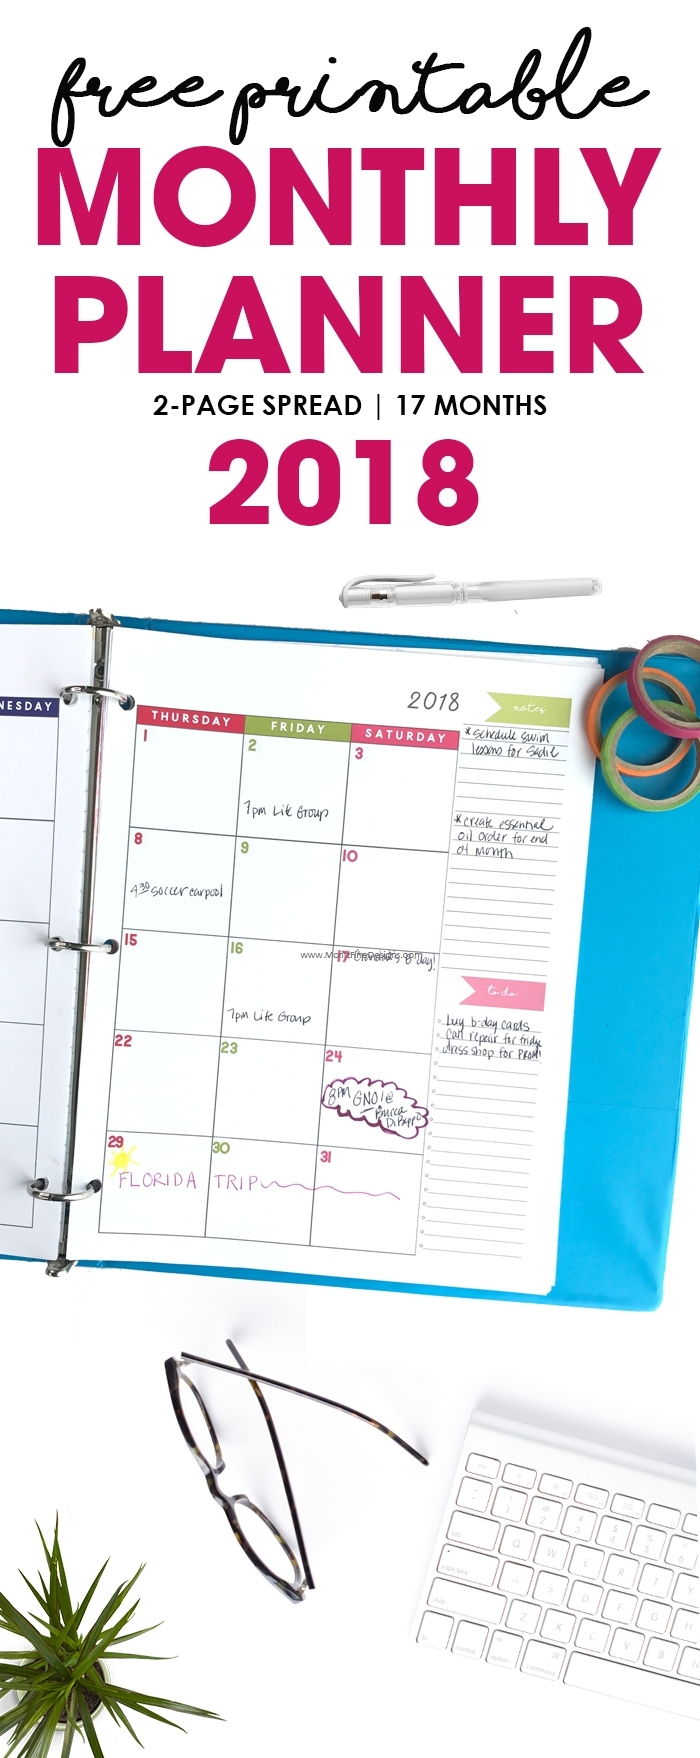 2018 Monthly Planner | Free Printable Calendar, 2-Page Spread in 2 Page Monthly Calendar Printable Free